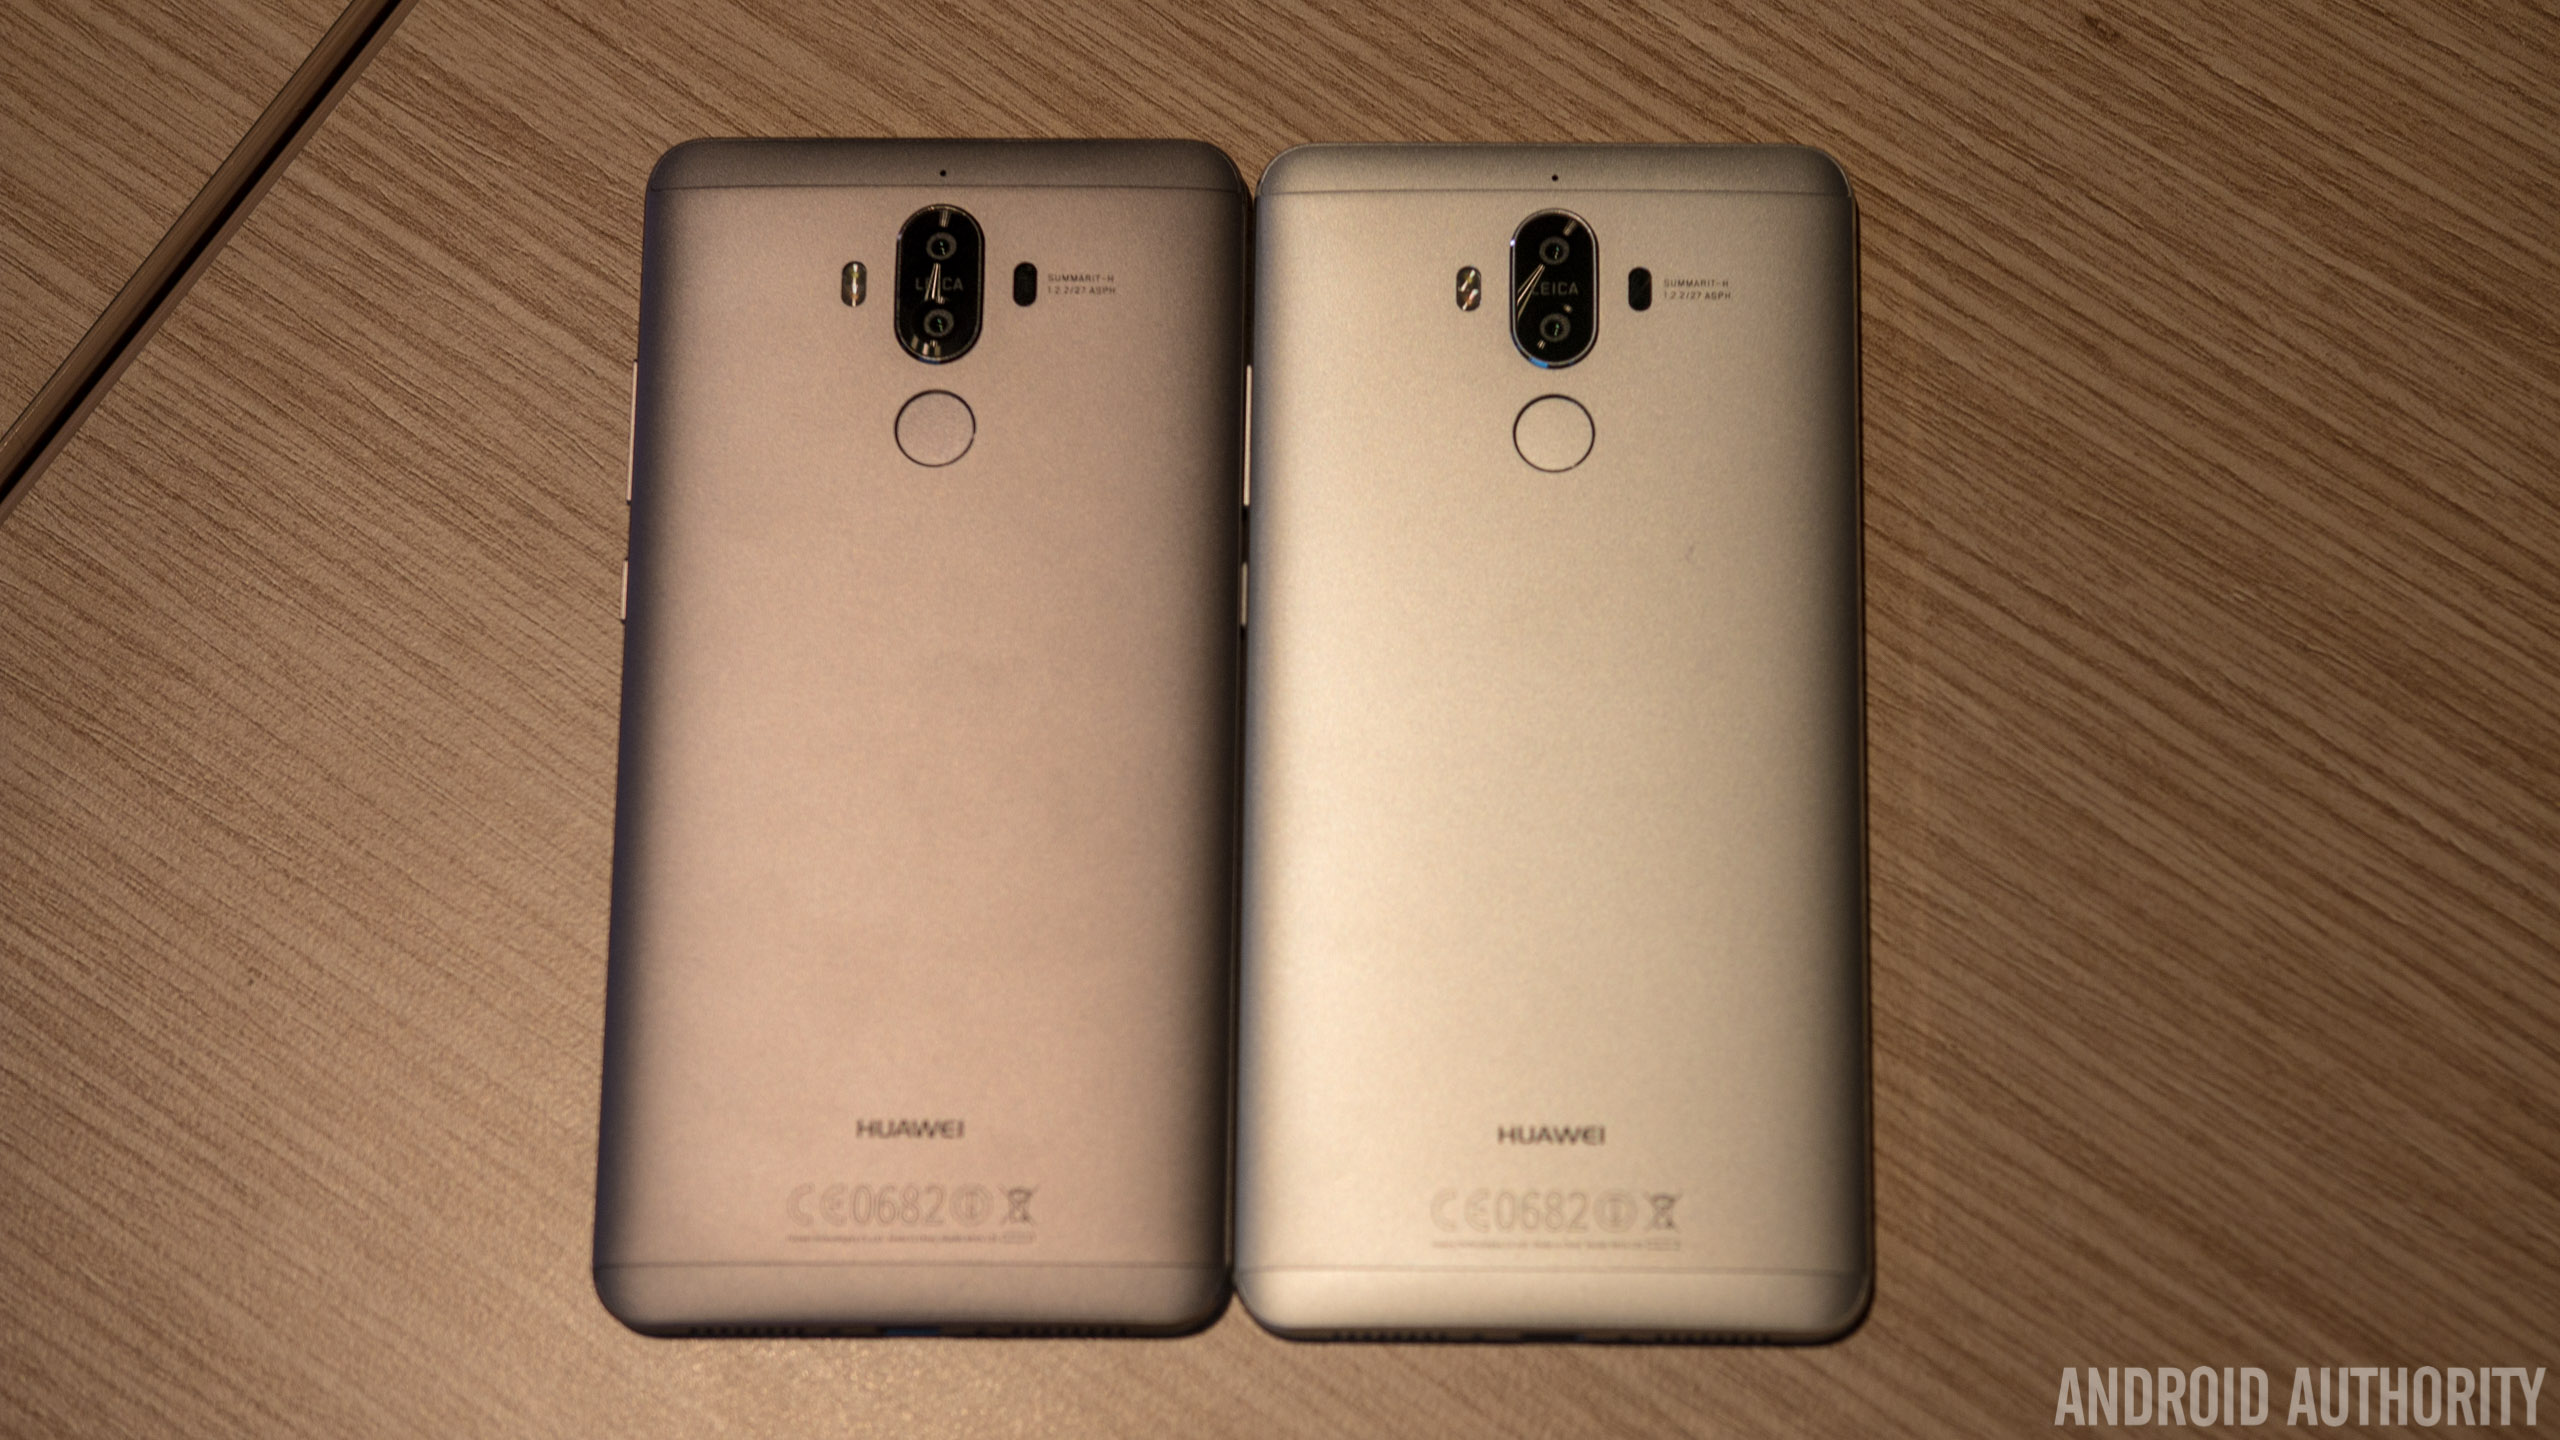 Entertainment spons vlinder HUAWEI Mate 9 specs, price, release date and everything else you should know